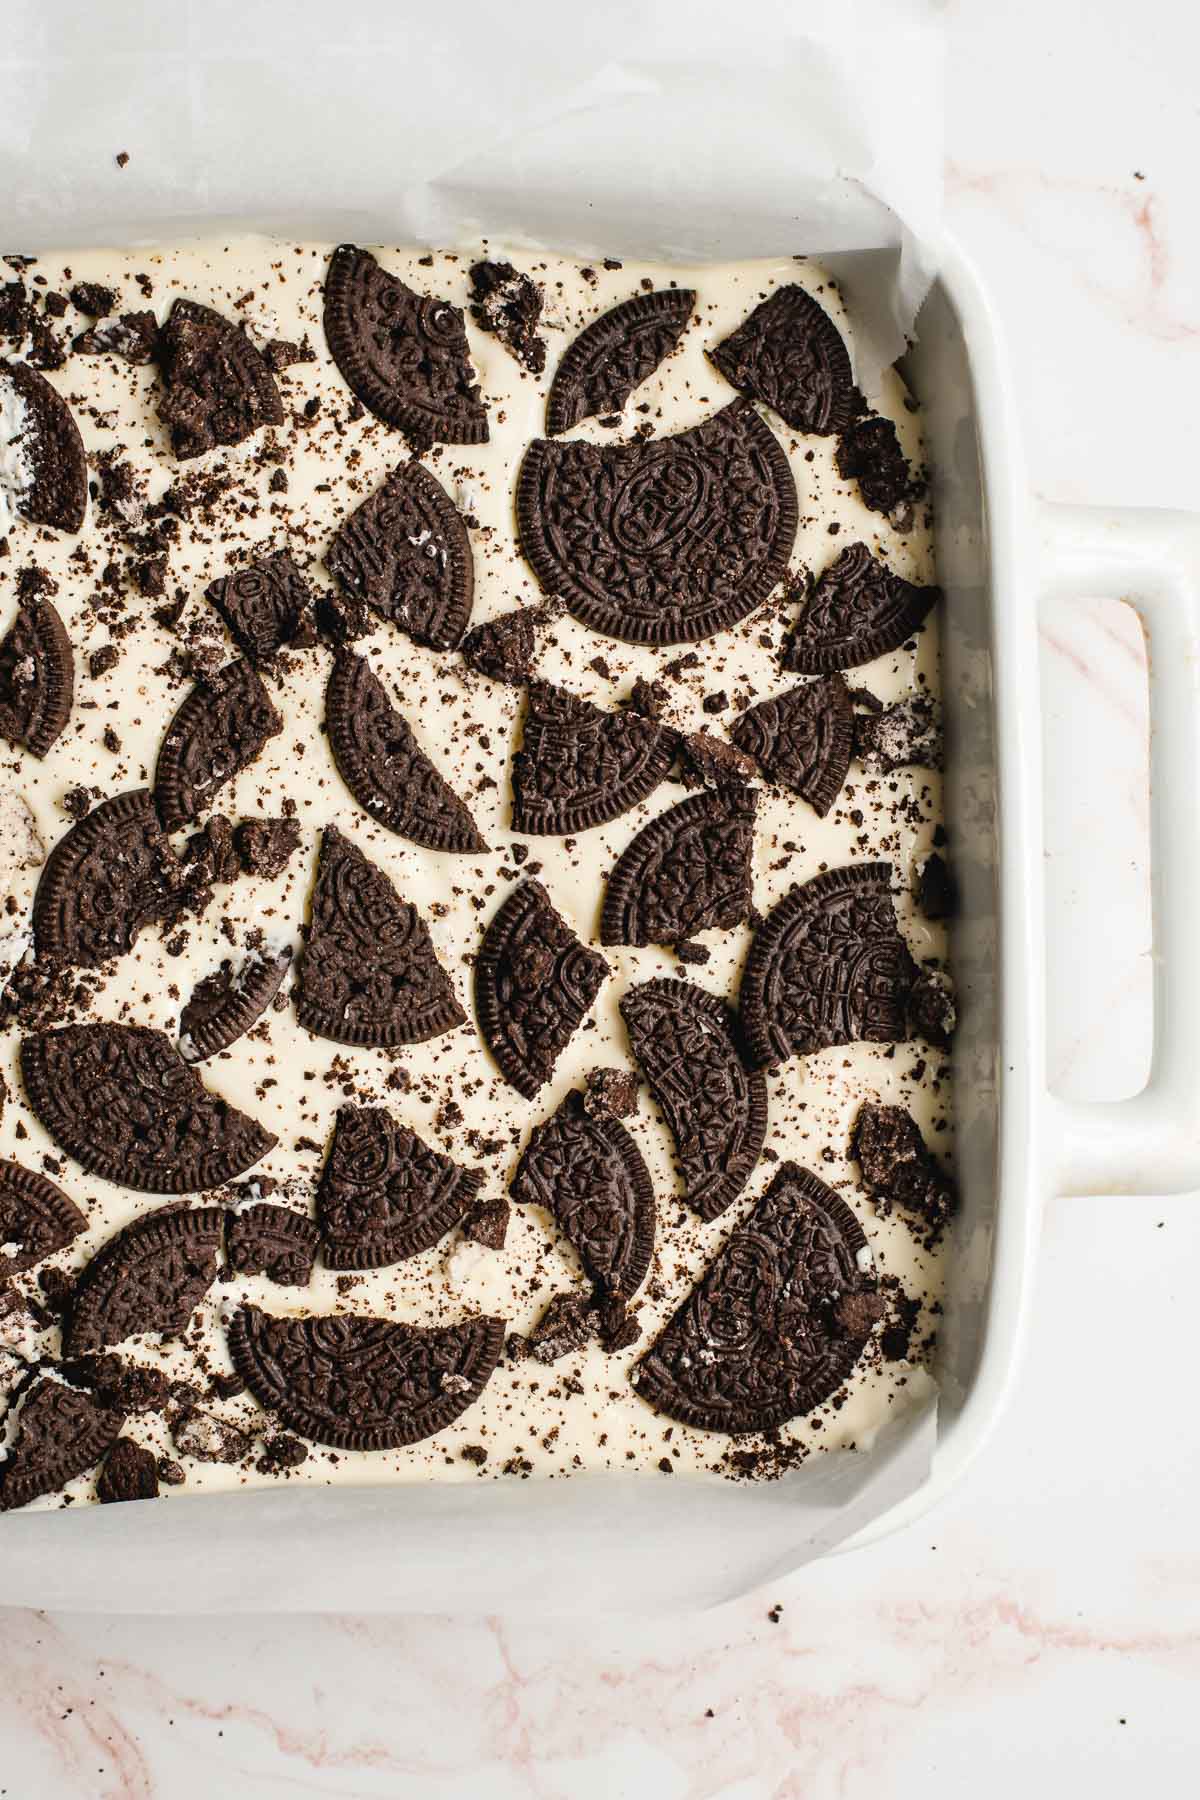 Unbaked cheesecake with broken pieces of Oreo on top.